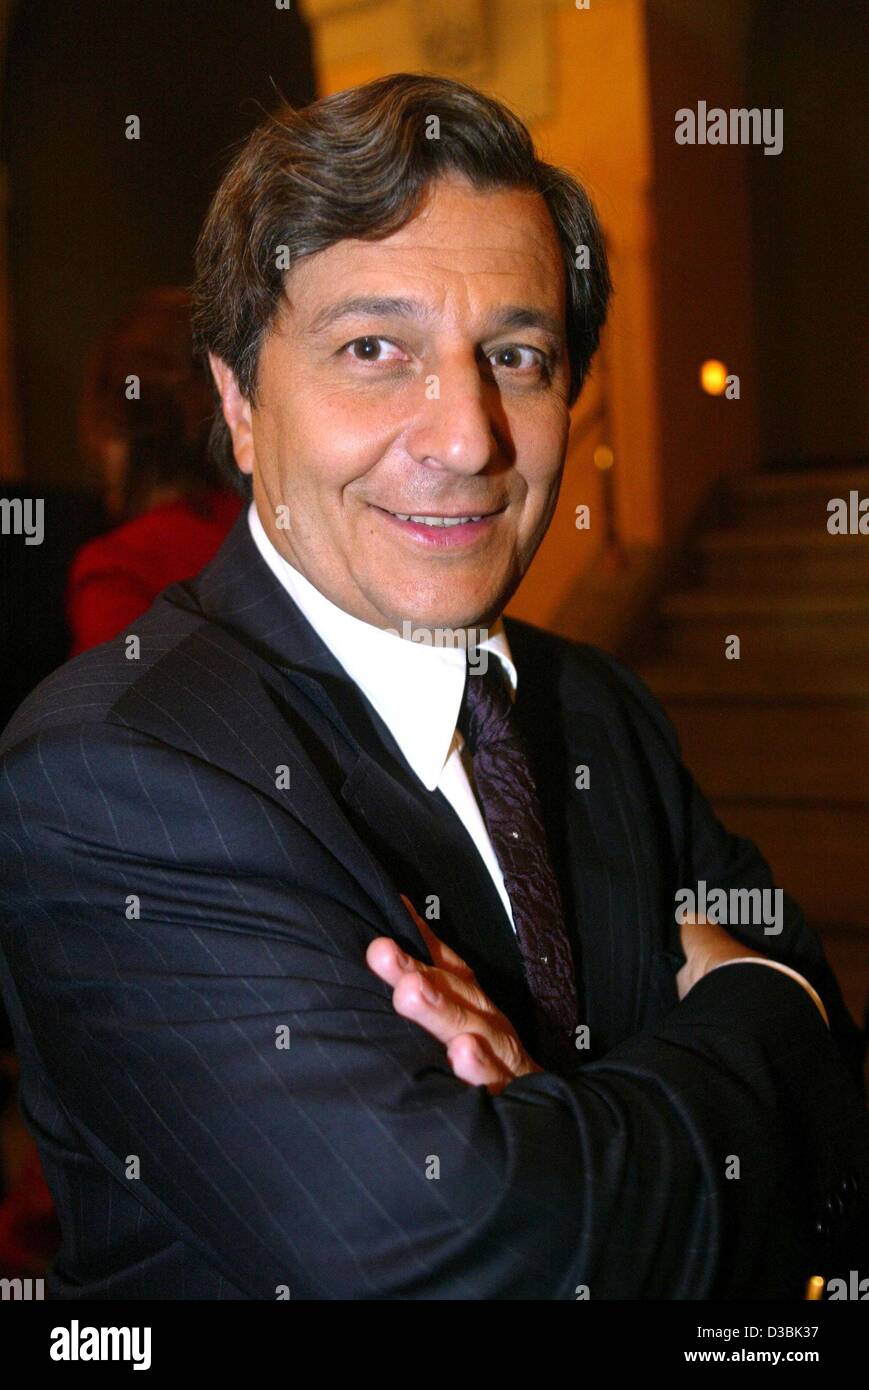 (dpa) - The French actor Christian Clavier ('Les visiteurs'/'The Visitors') smiles during the award ceremony of the Bayerischer Fernsehpreis (Bavarian TV prize) in Munich, 23 May 2003. The producer of the German-French mini series 'Napoleon', starring Clavier, won an award for the series. The prize  Stock Photo